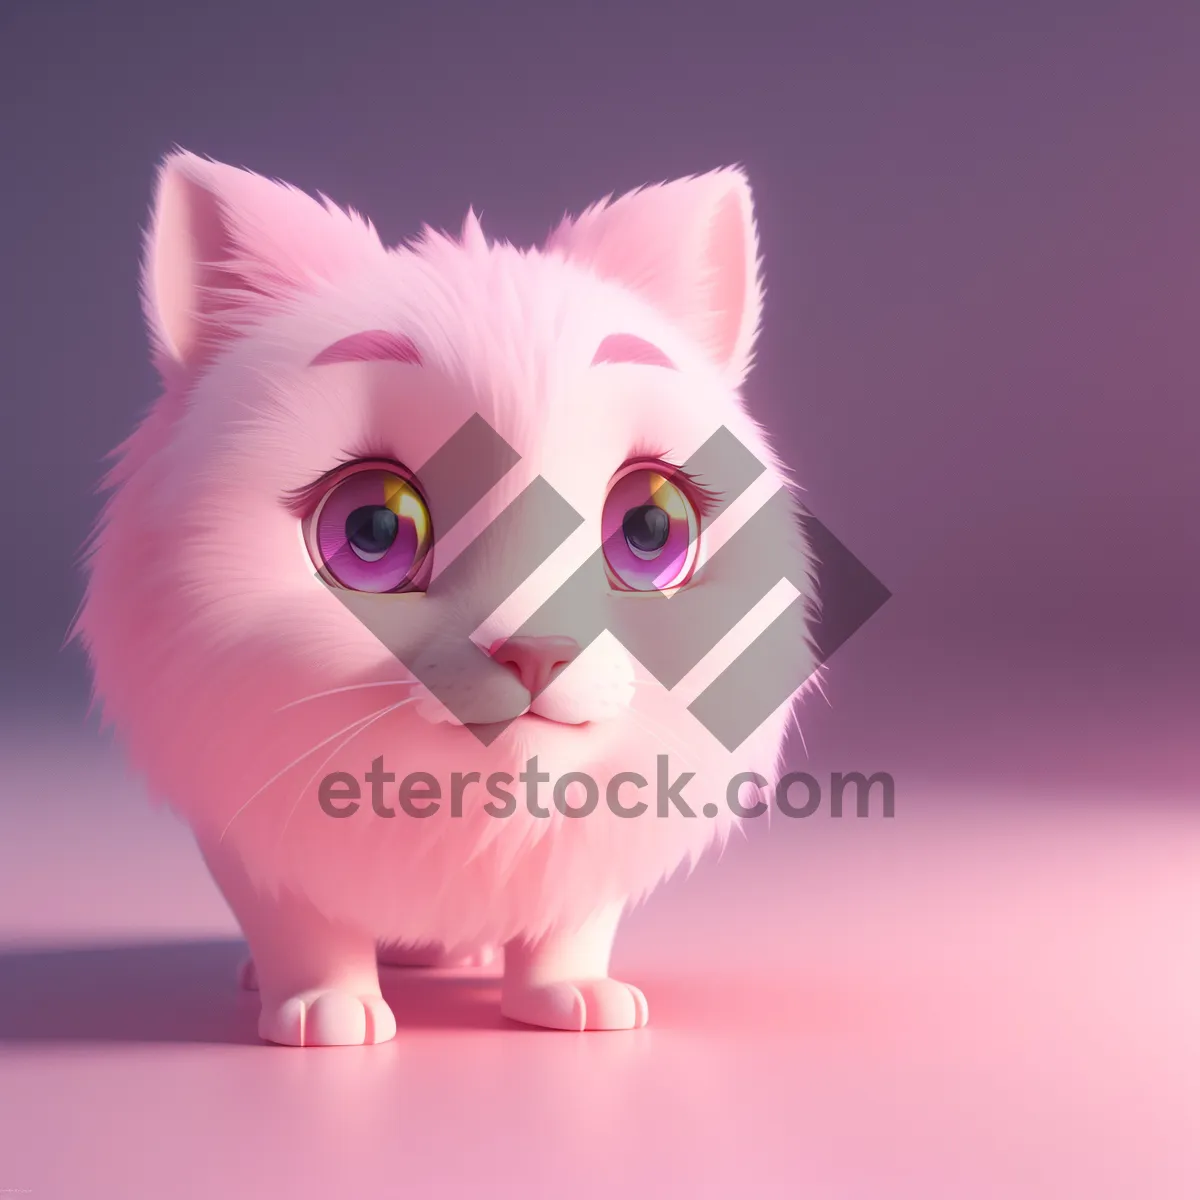 Picture of Cute Kitty Cartoon with Pink Fur